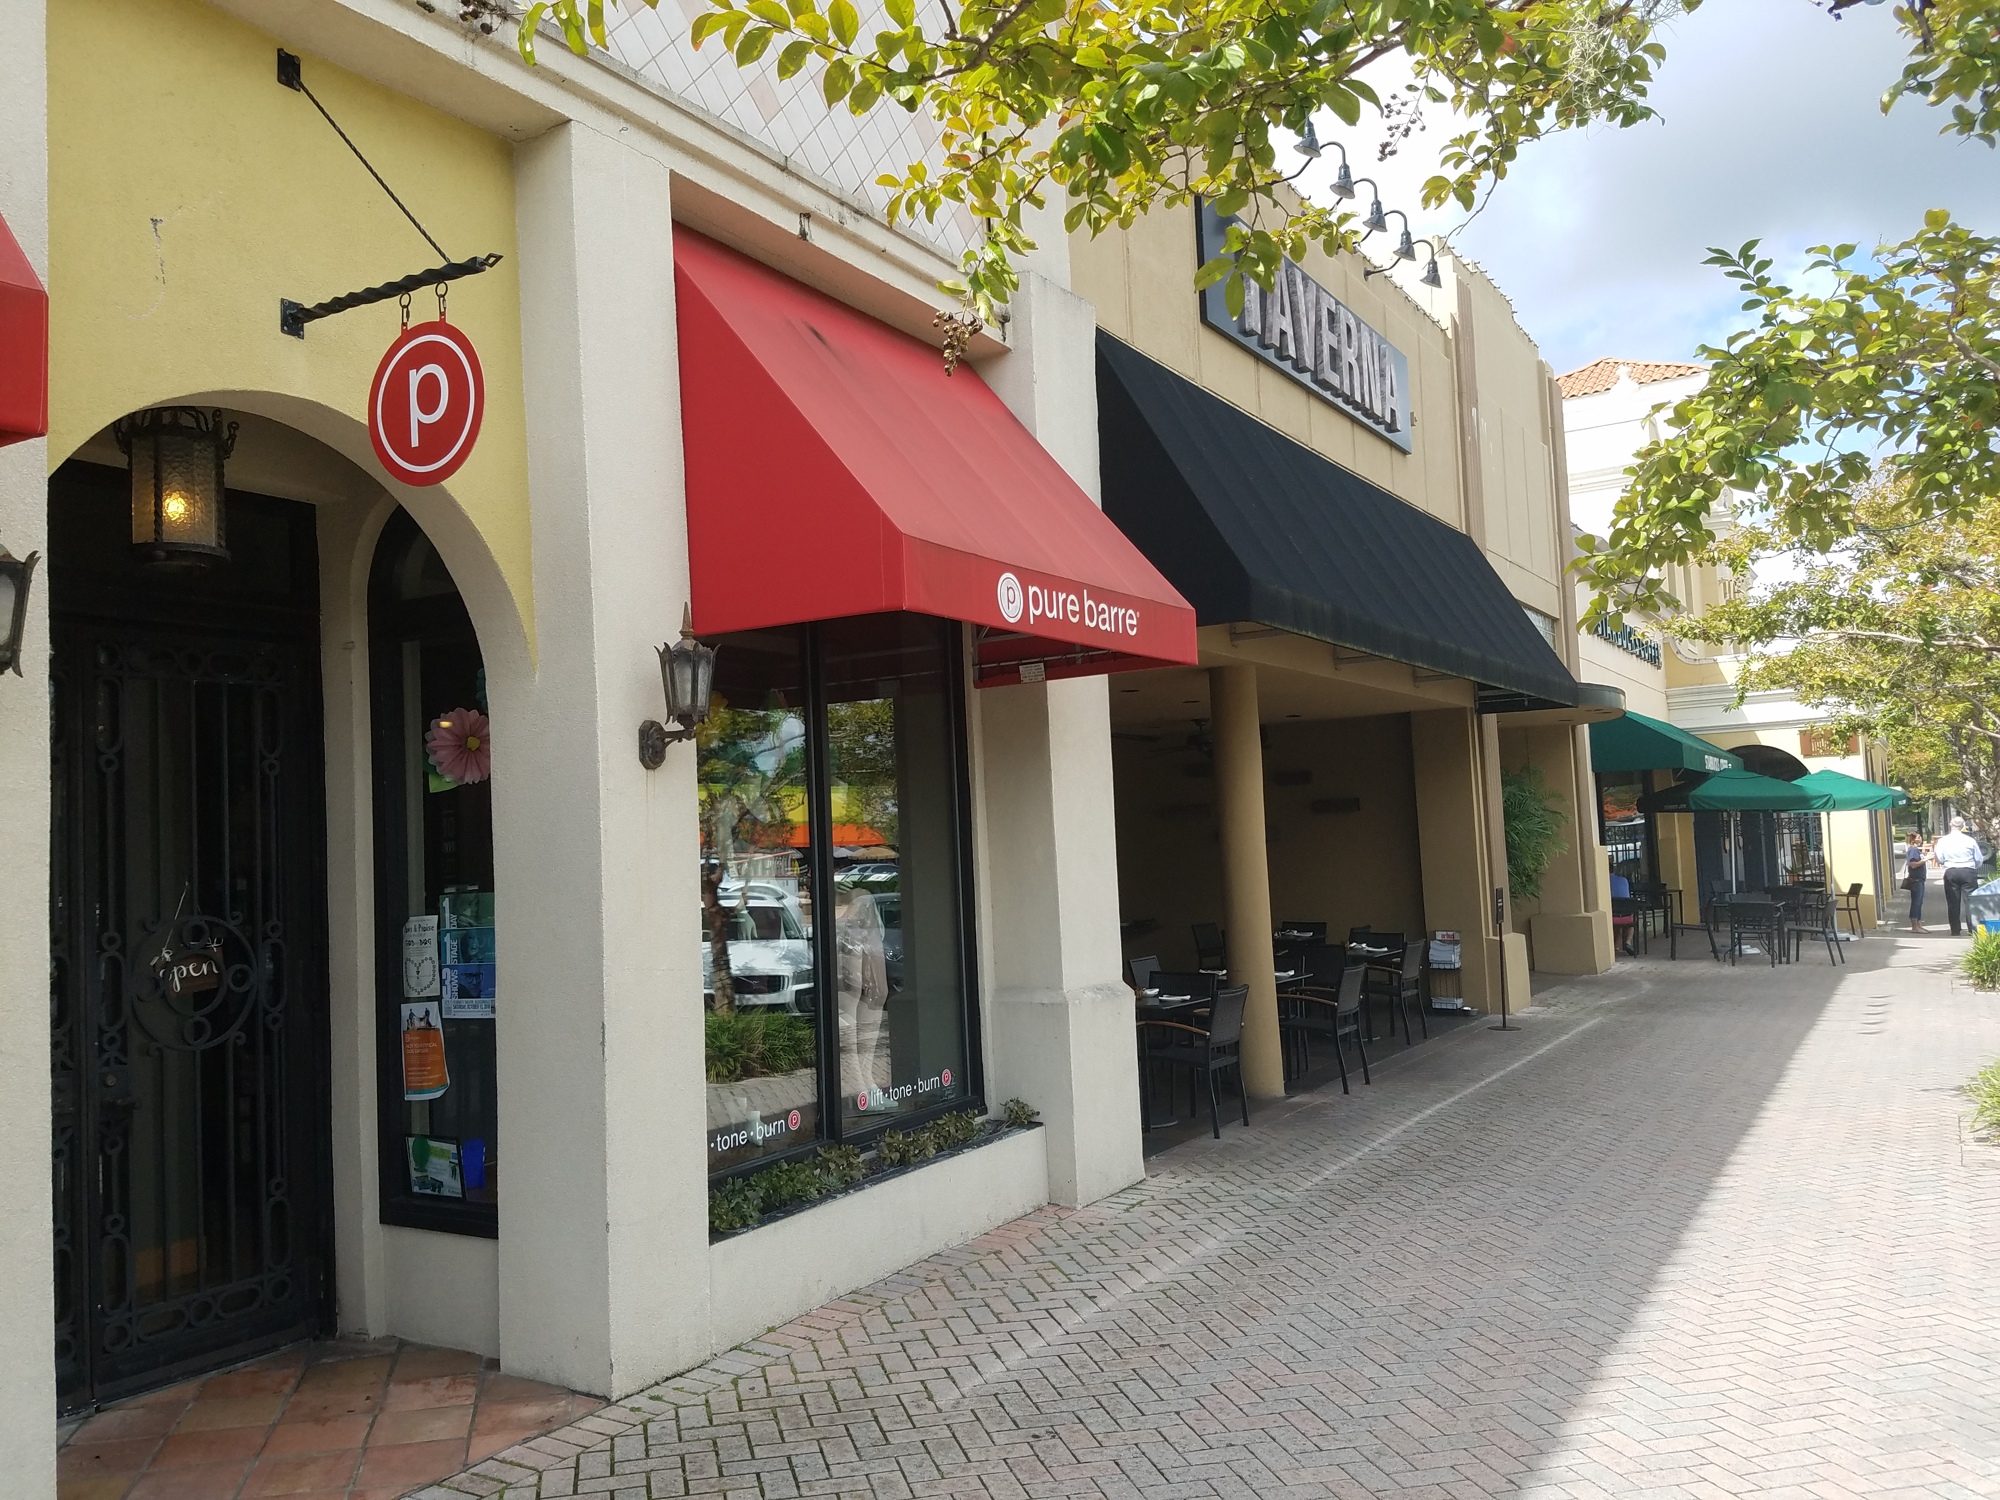 The owners of Taverna are taking over the former Pure Barre space next door at 1988 San Marco Blvd. for an Asian-themed restaurant.